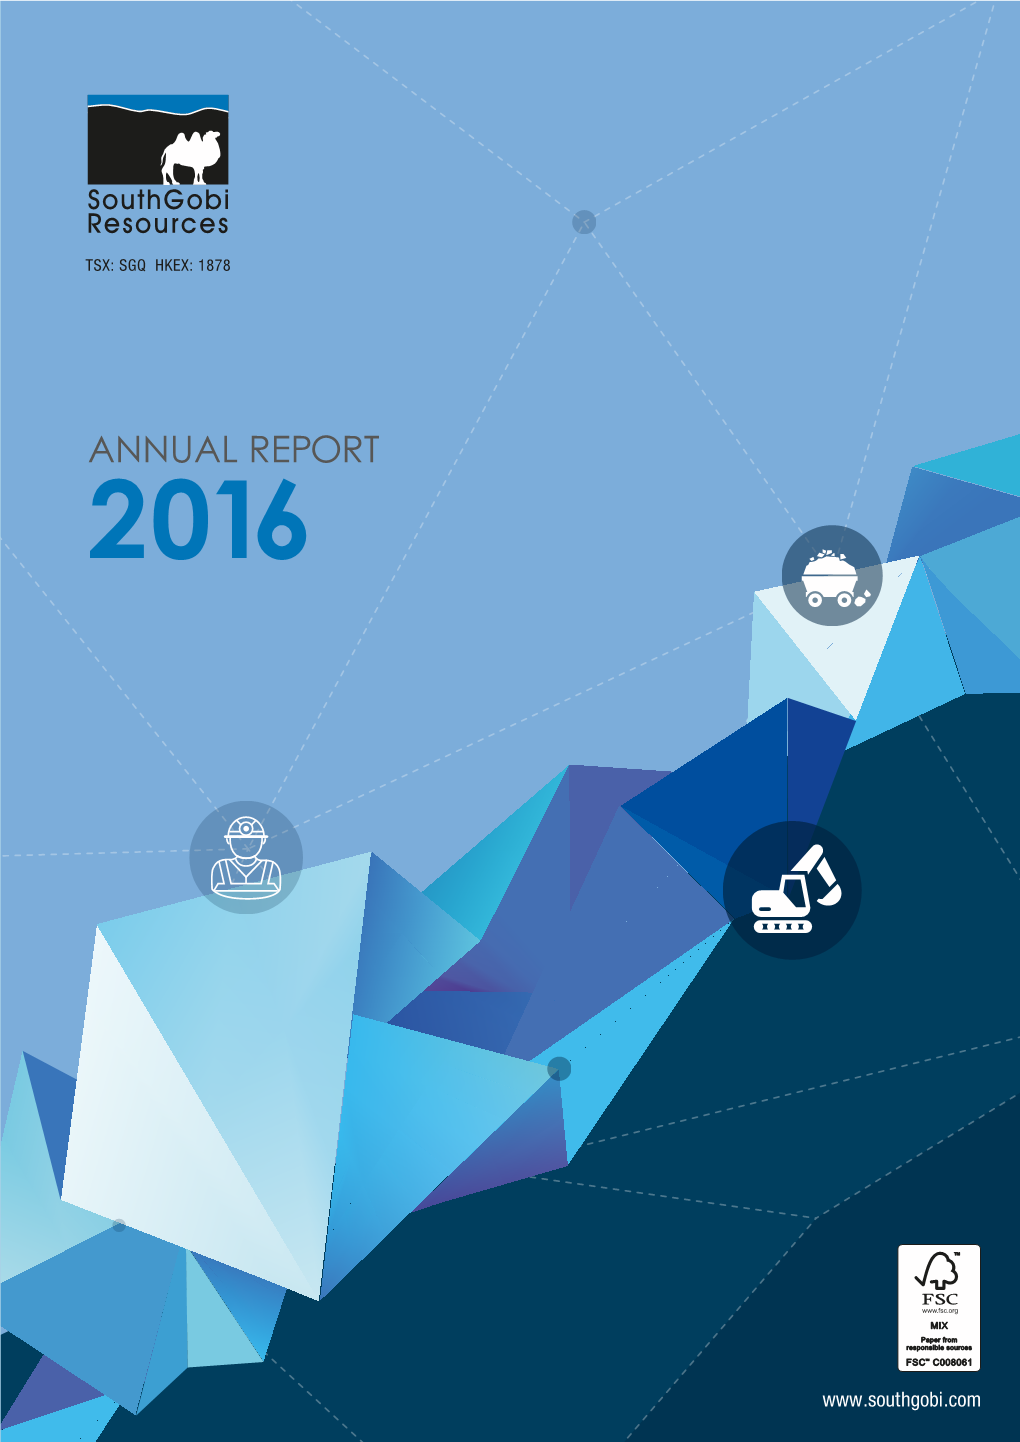 ANNUAL REPORT 2016 2016 Annual Report 201 6 年年報 年年報